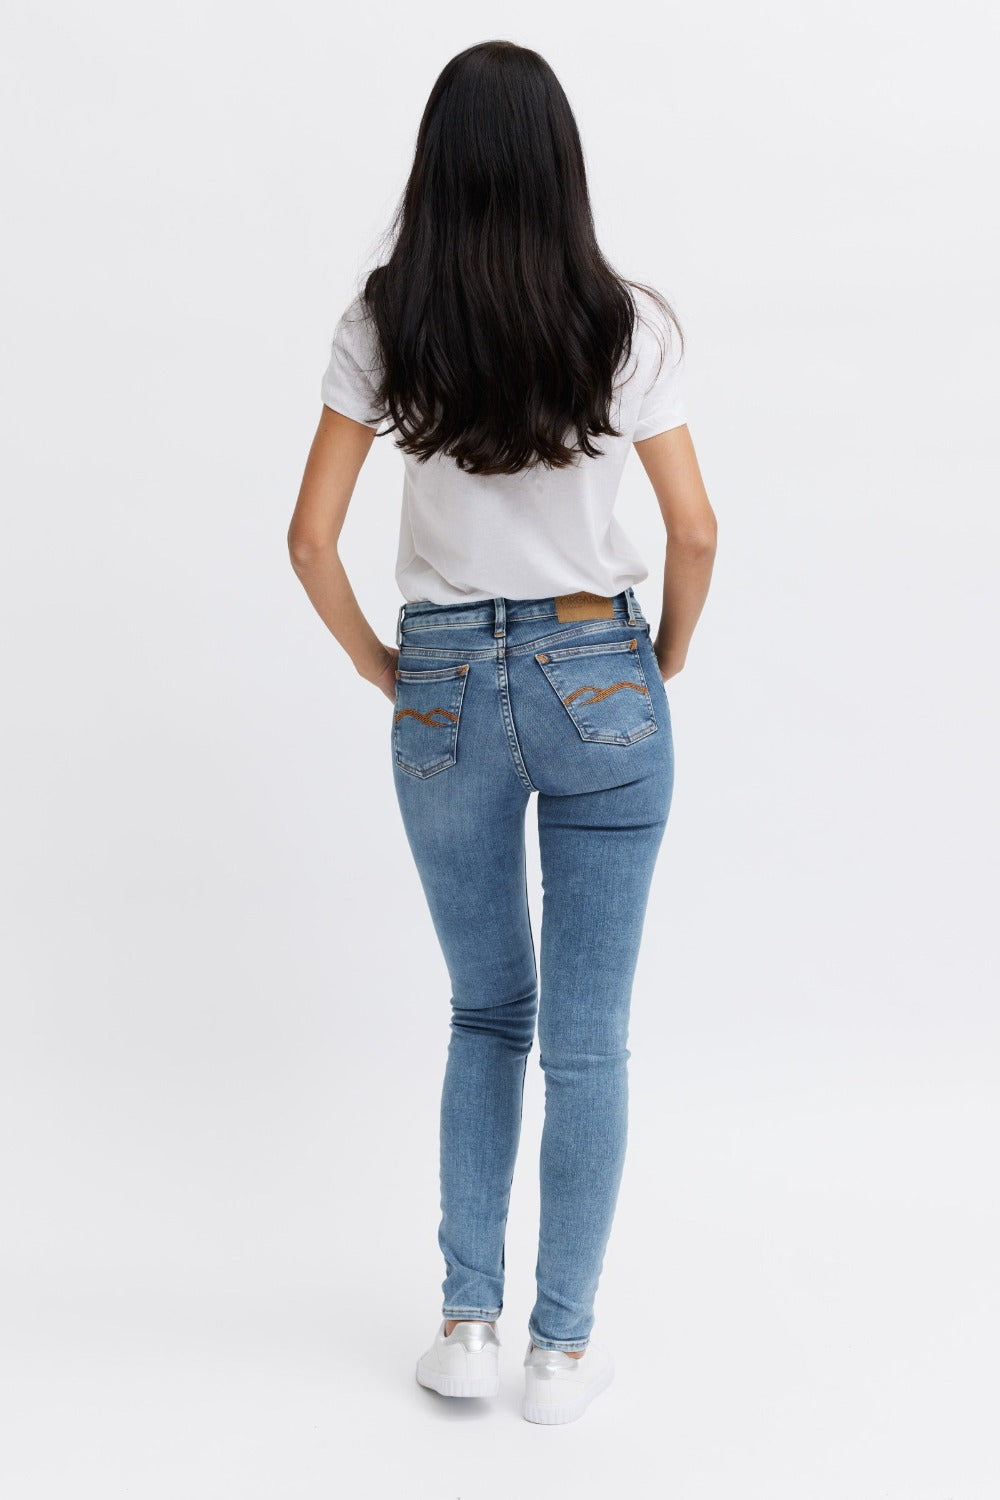 Form fitting women's jeans with orange detail - organic cotton